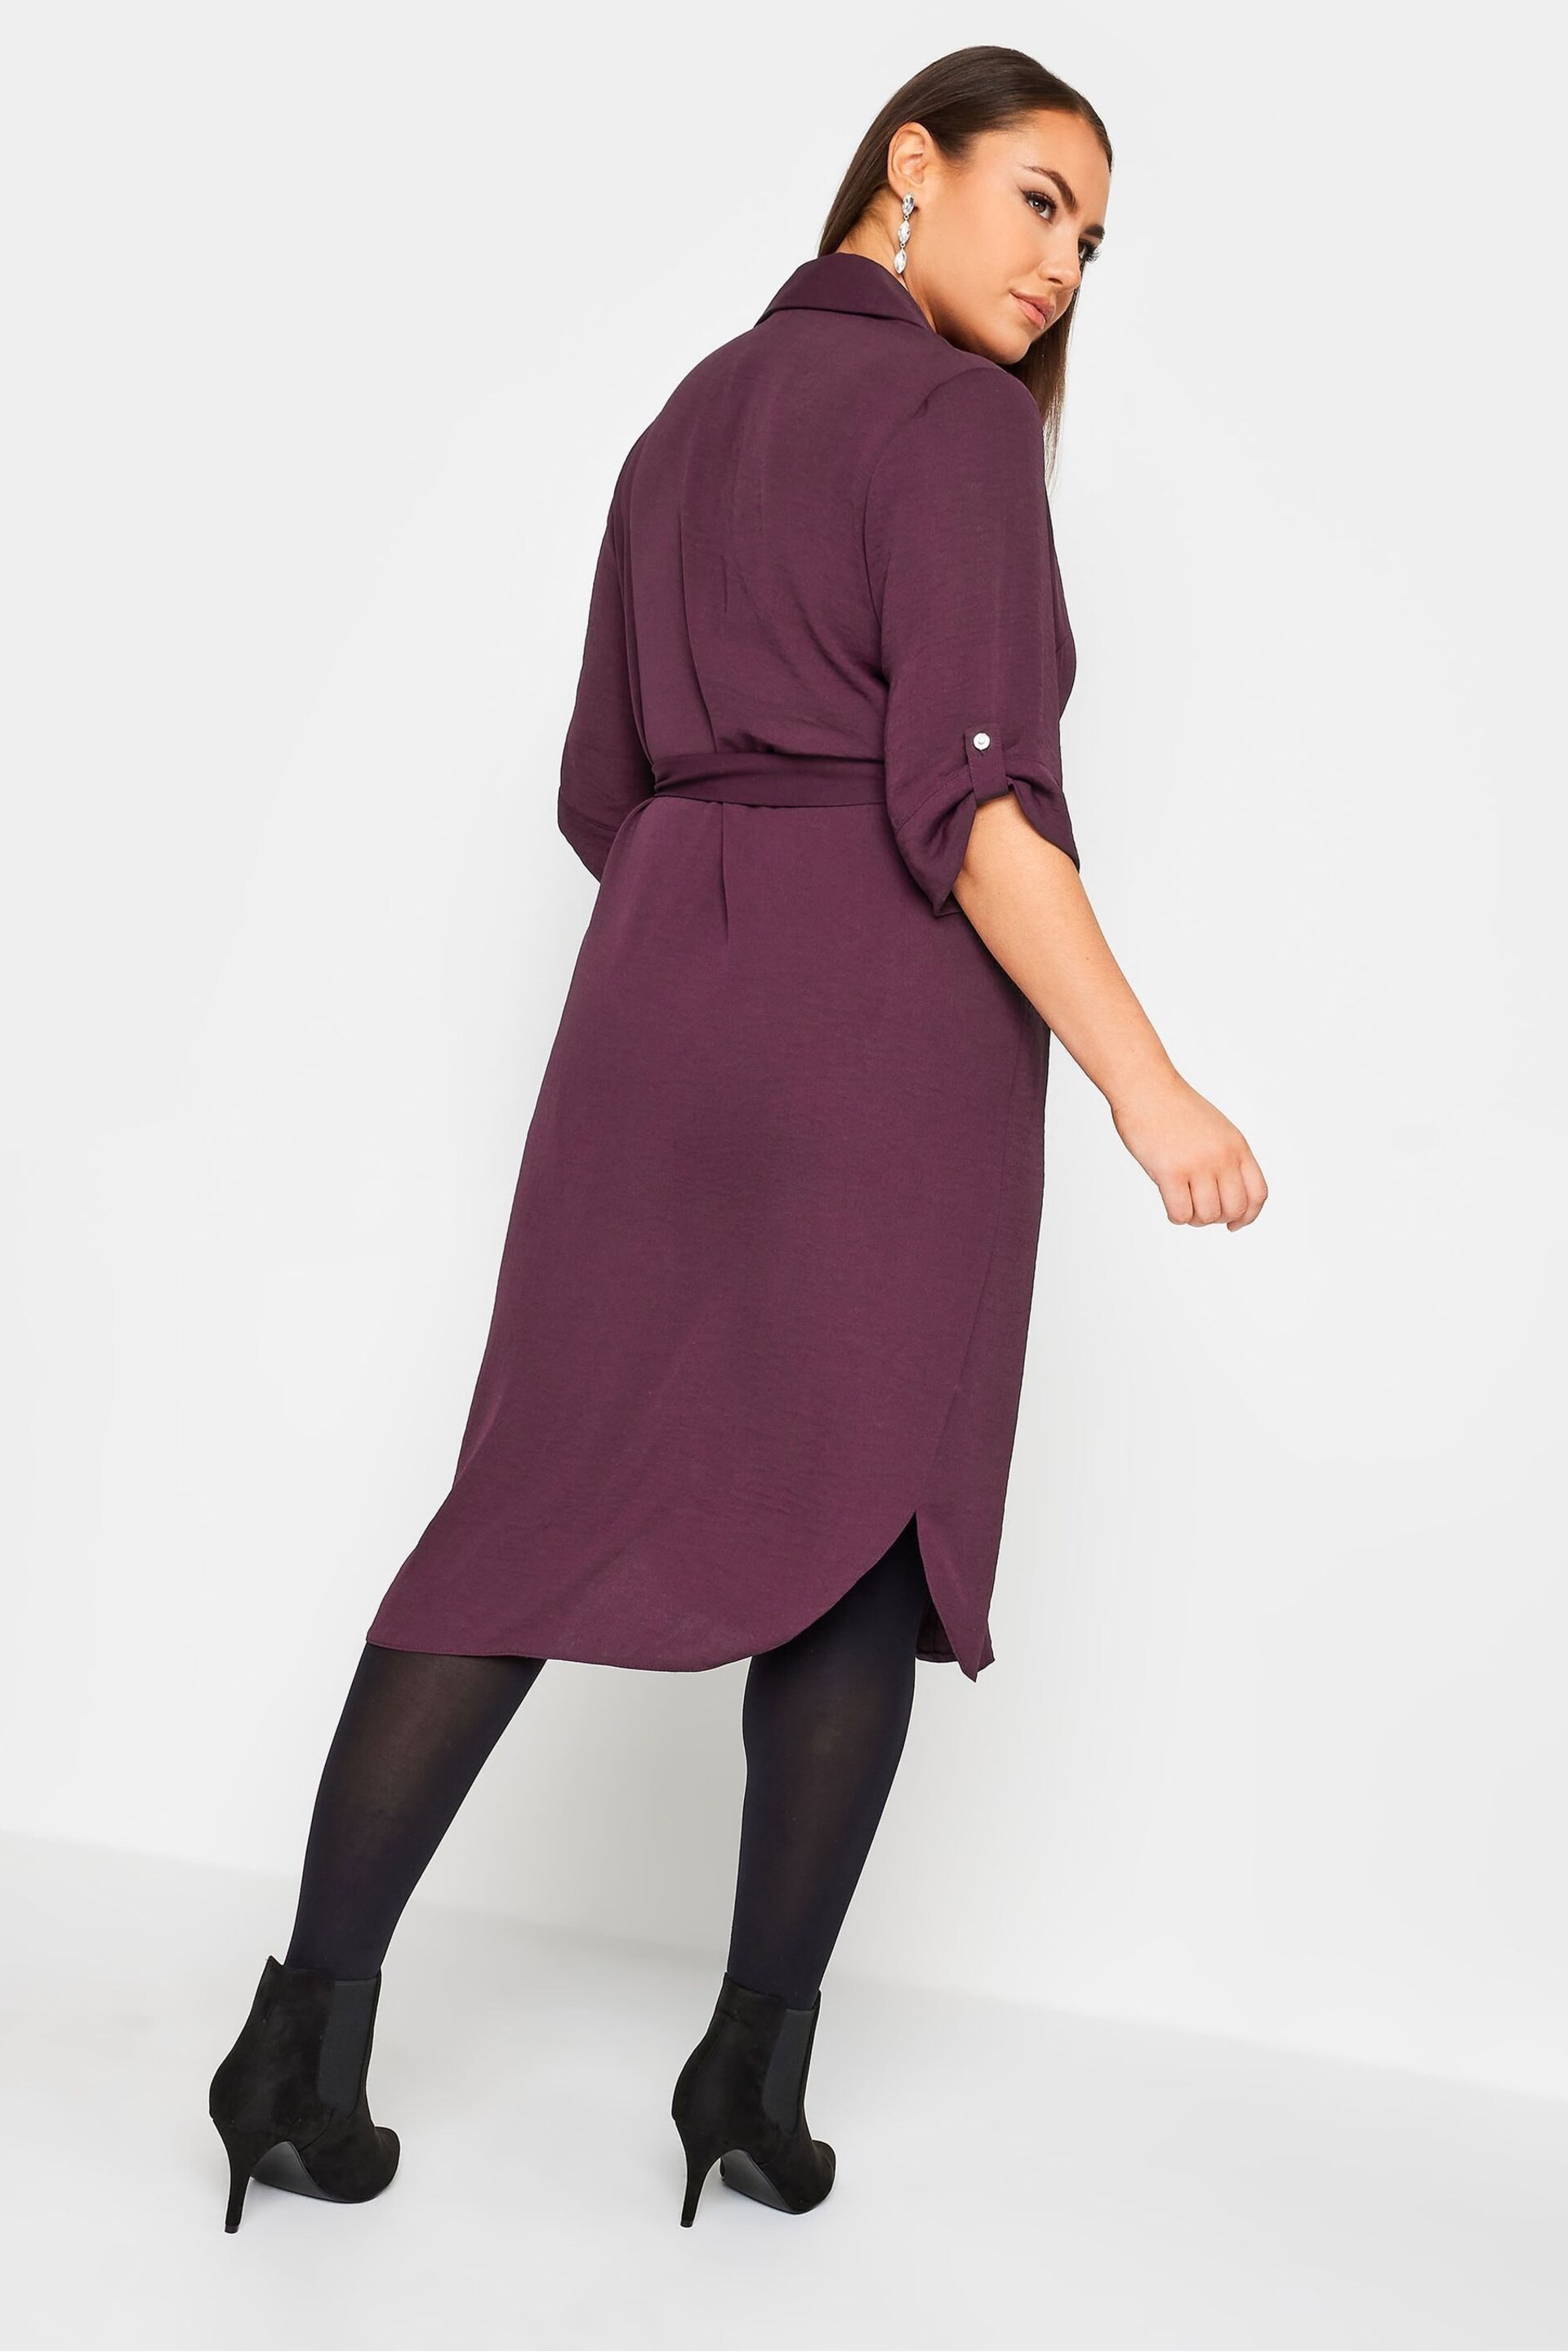 Yours Curve Purple Tab 3/4 Sleeve Dress - Image 2 of 4